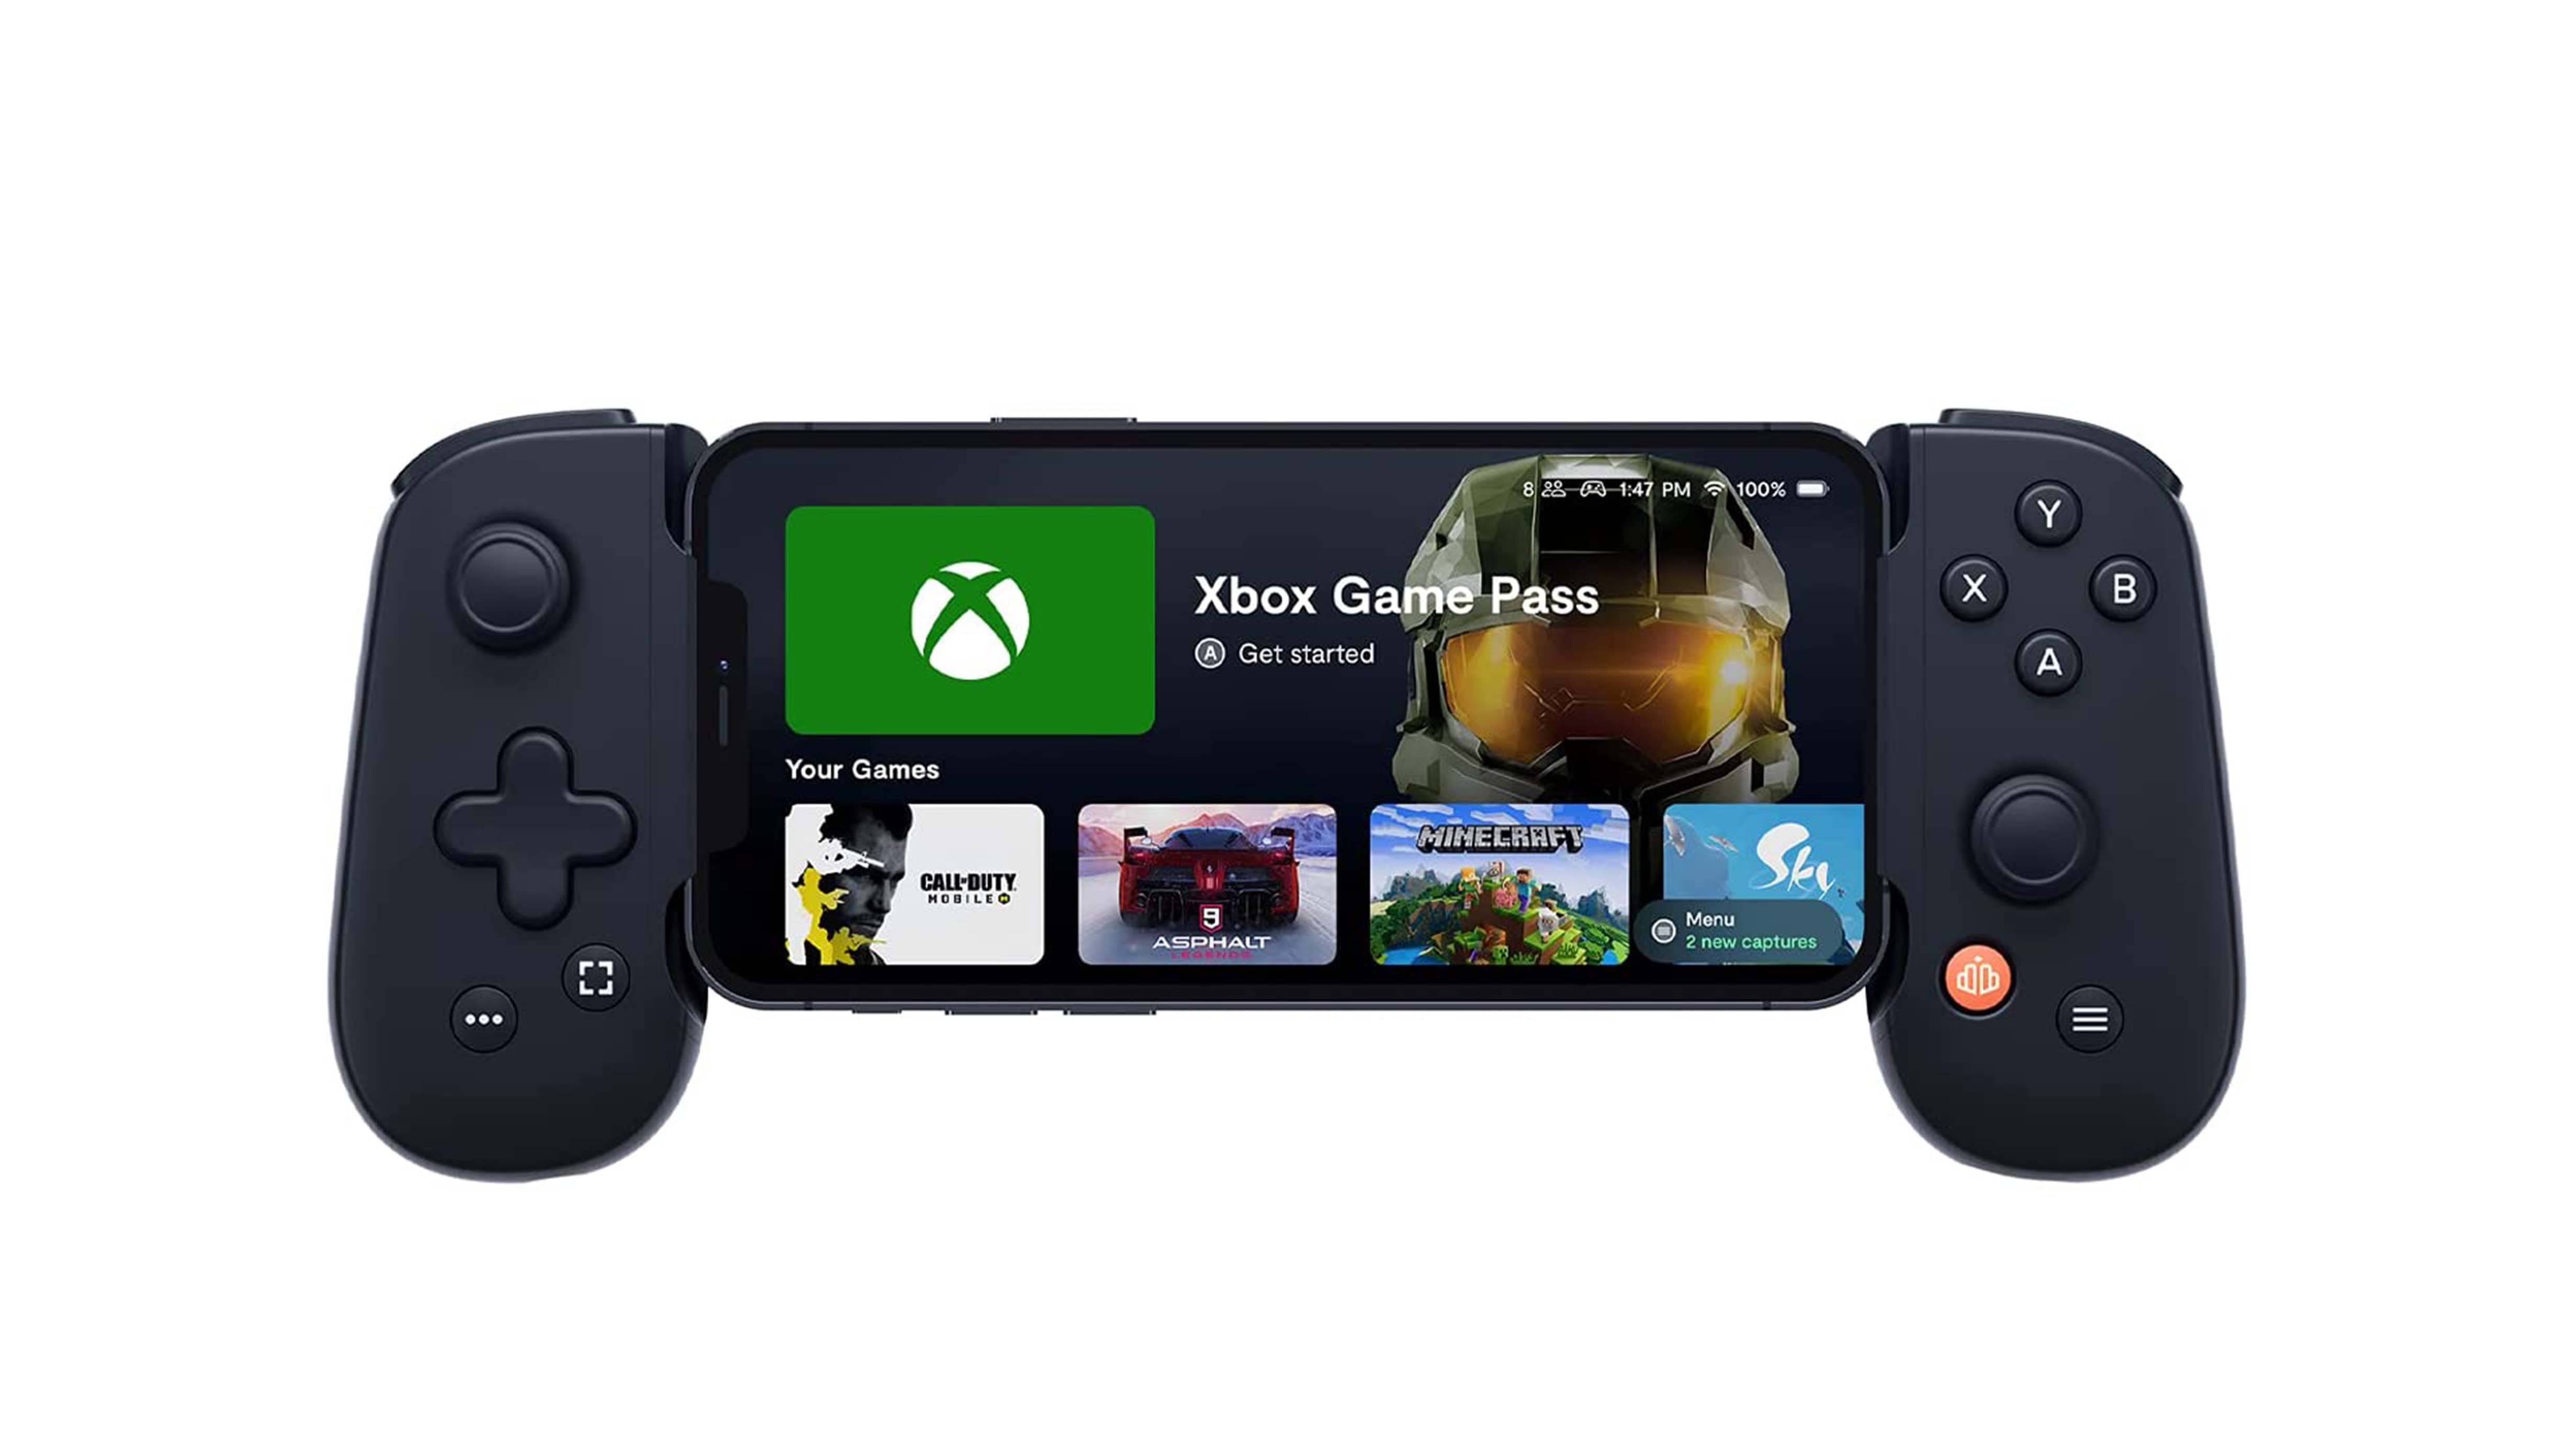 RiotPWR iPhone Xbox Controller pre-sale goes live - 9to5Toys